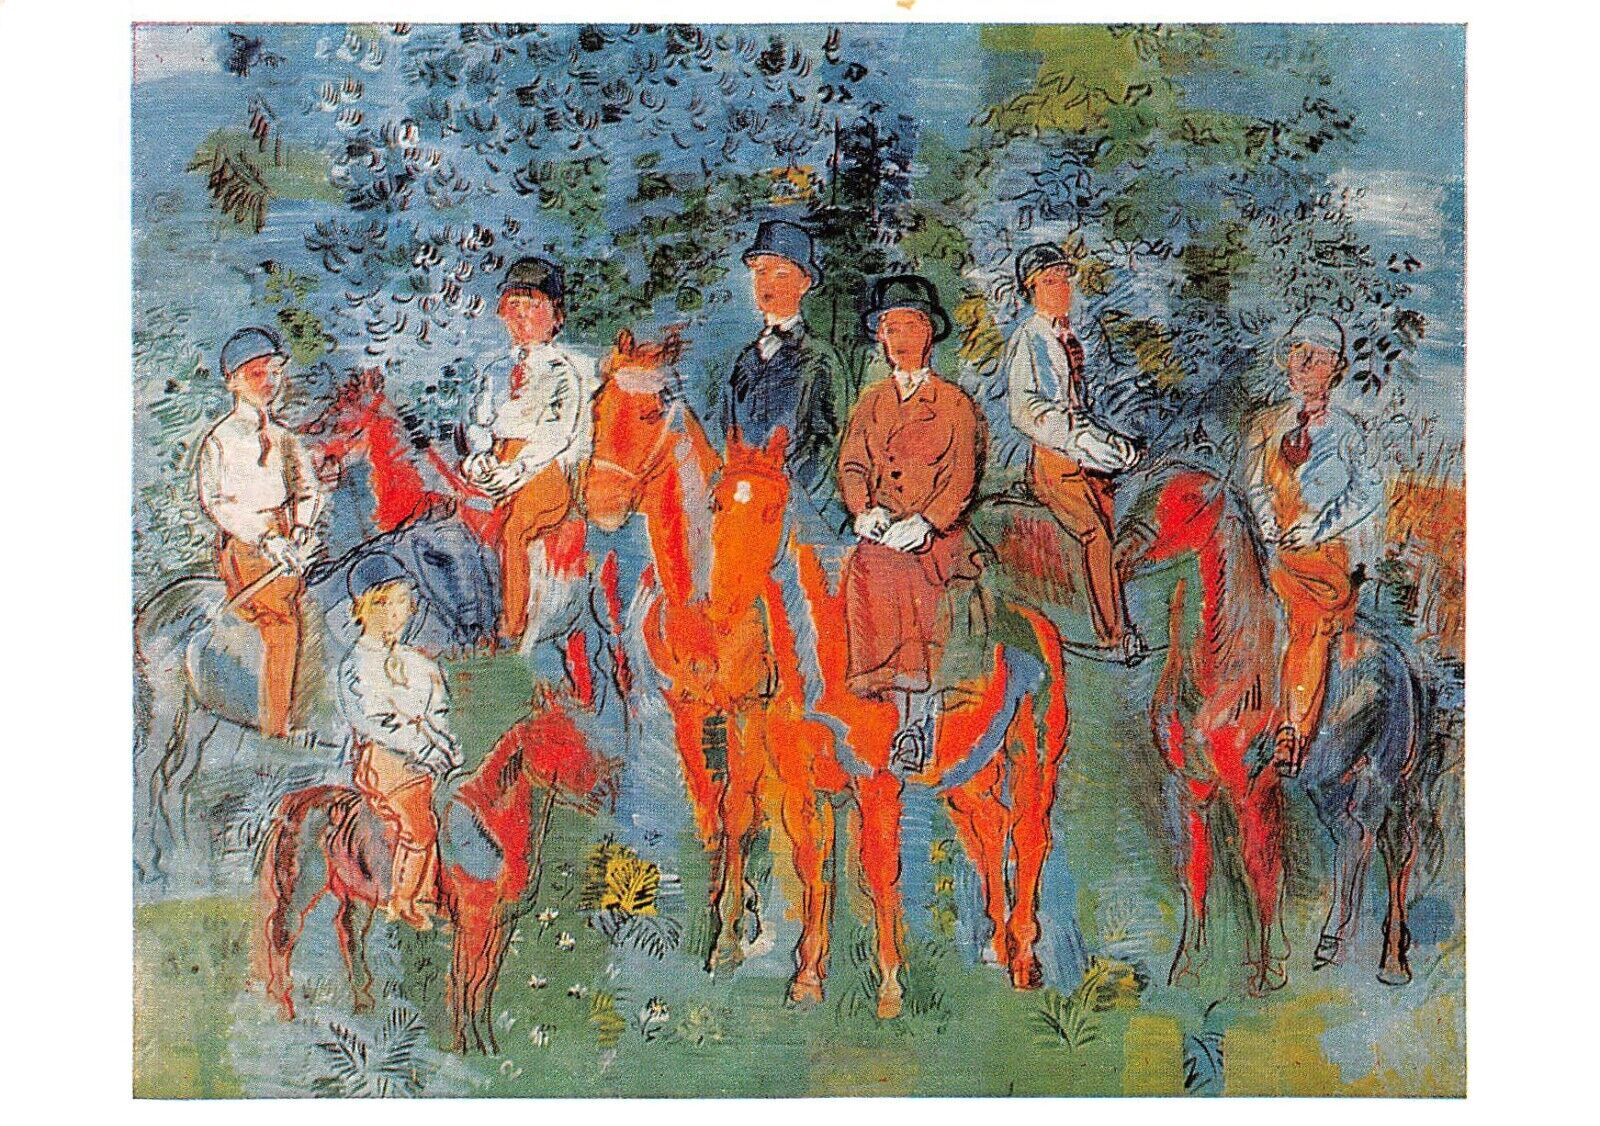 RIDERS IN THE WOODS by Raoul Dufy (1877-1931) 6X4 Postcard 6305c